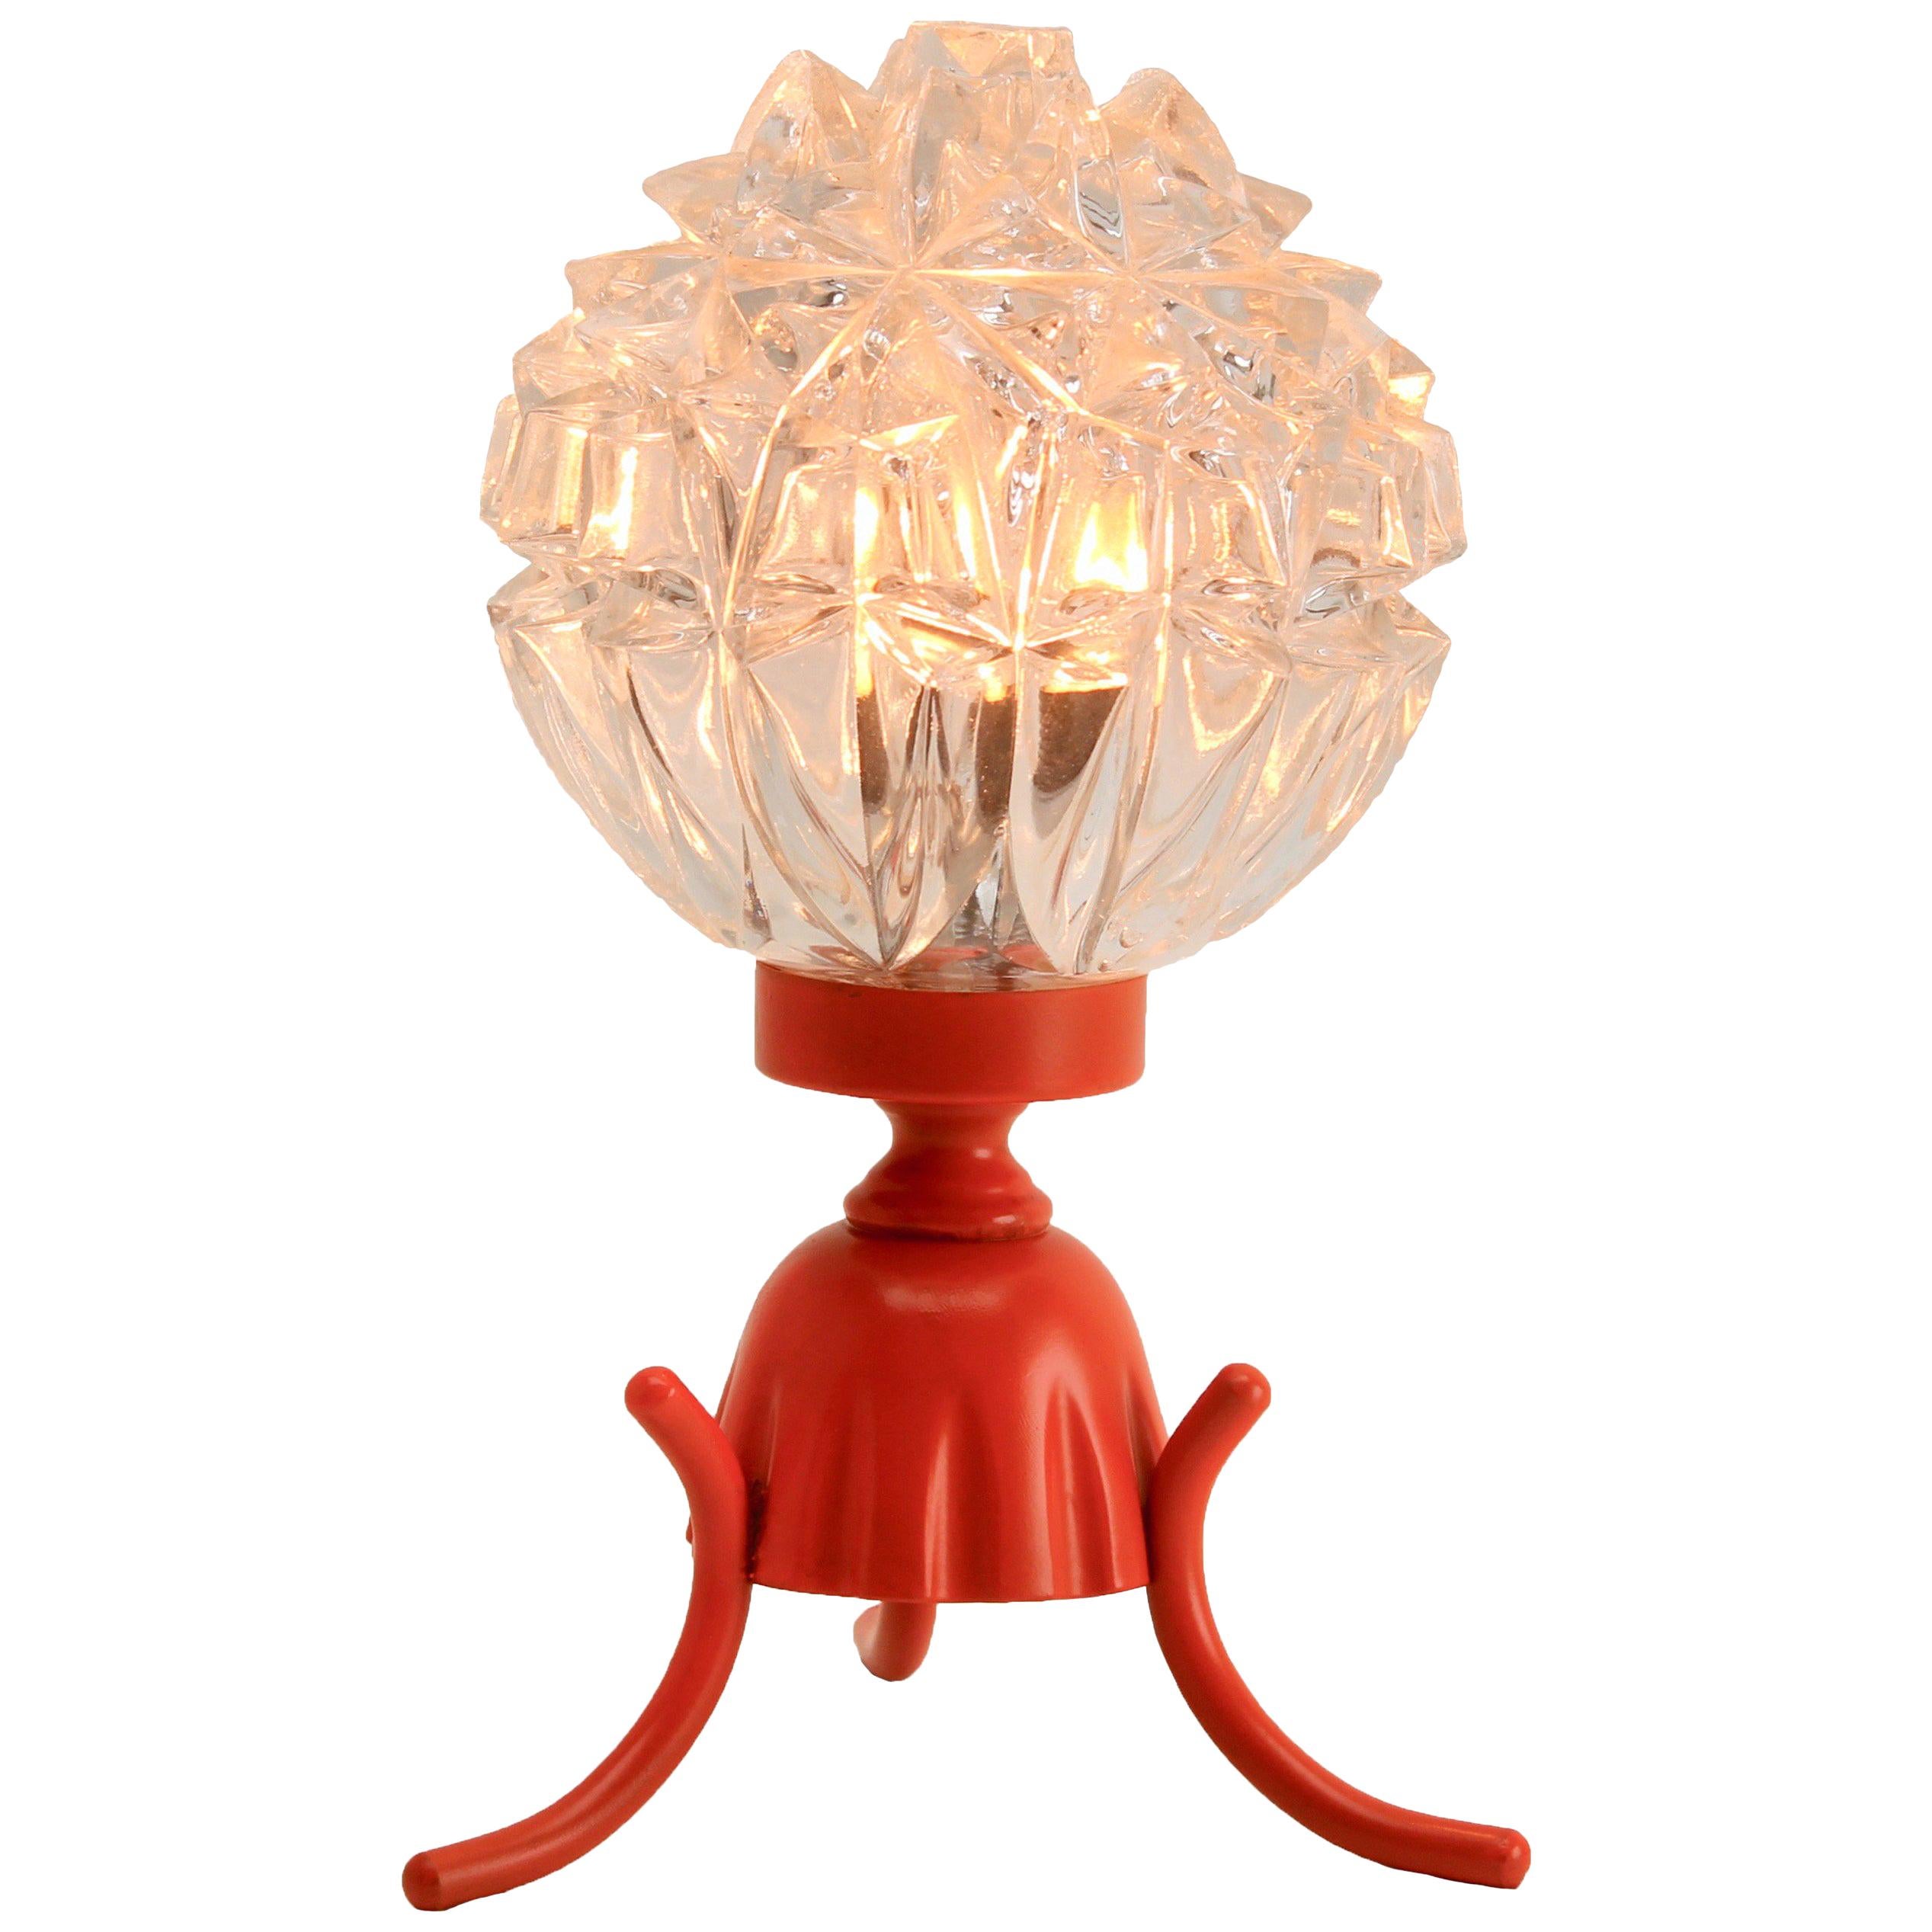 Tangerine Retro Bedside Lamp with Iron Base and Scatter-Light Glass Shade